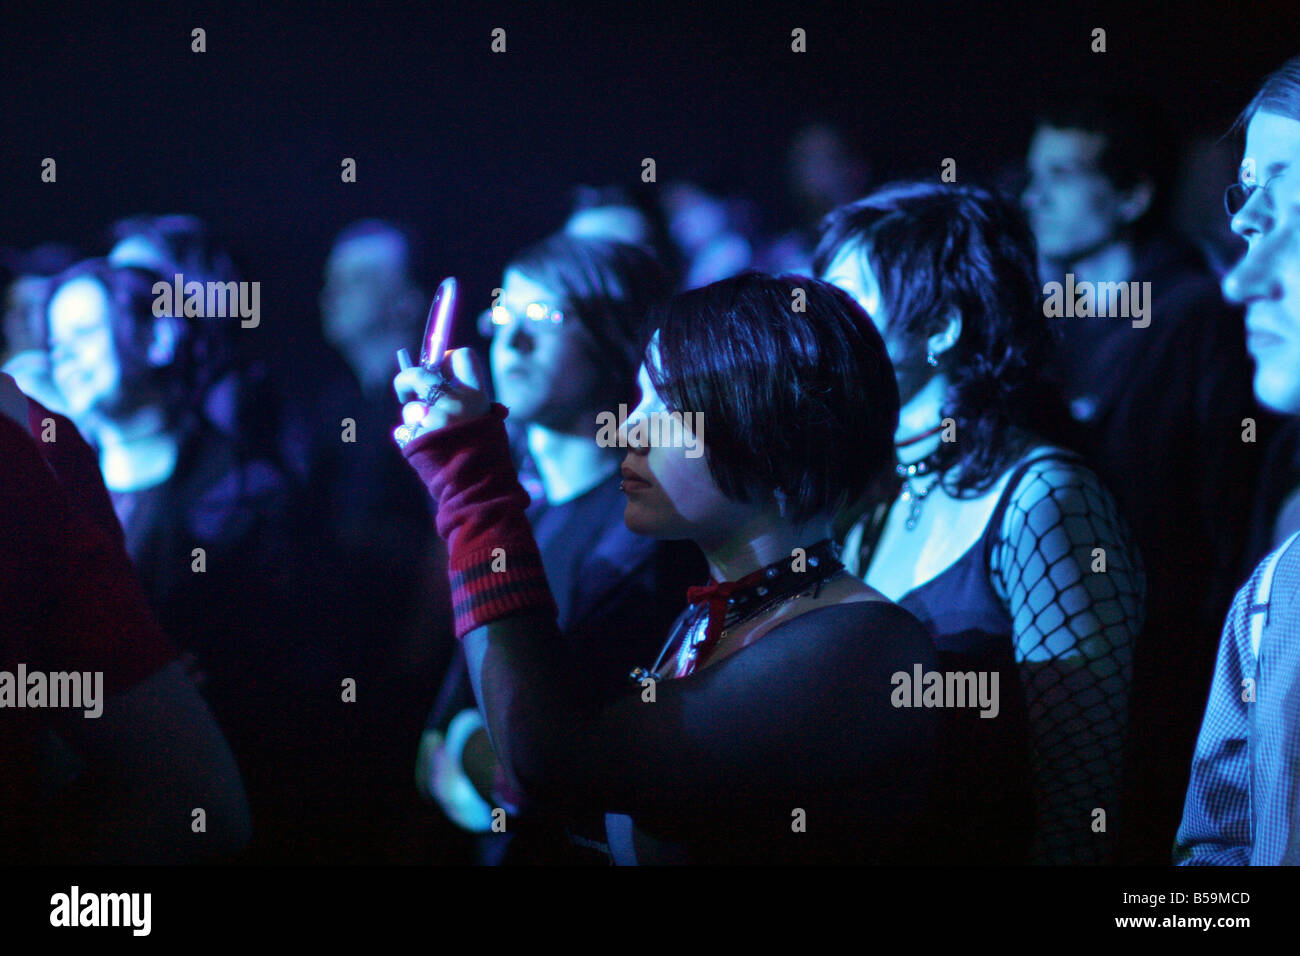 Girl making a photo with mobile during concert Stock Photo